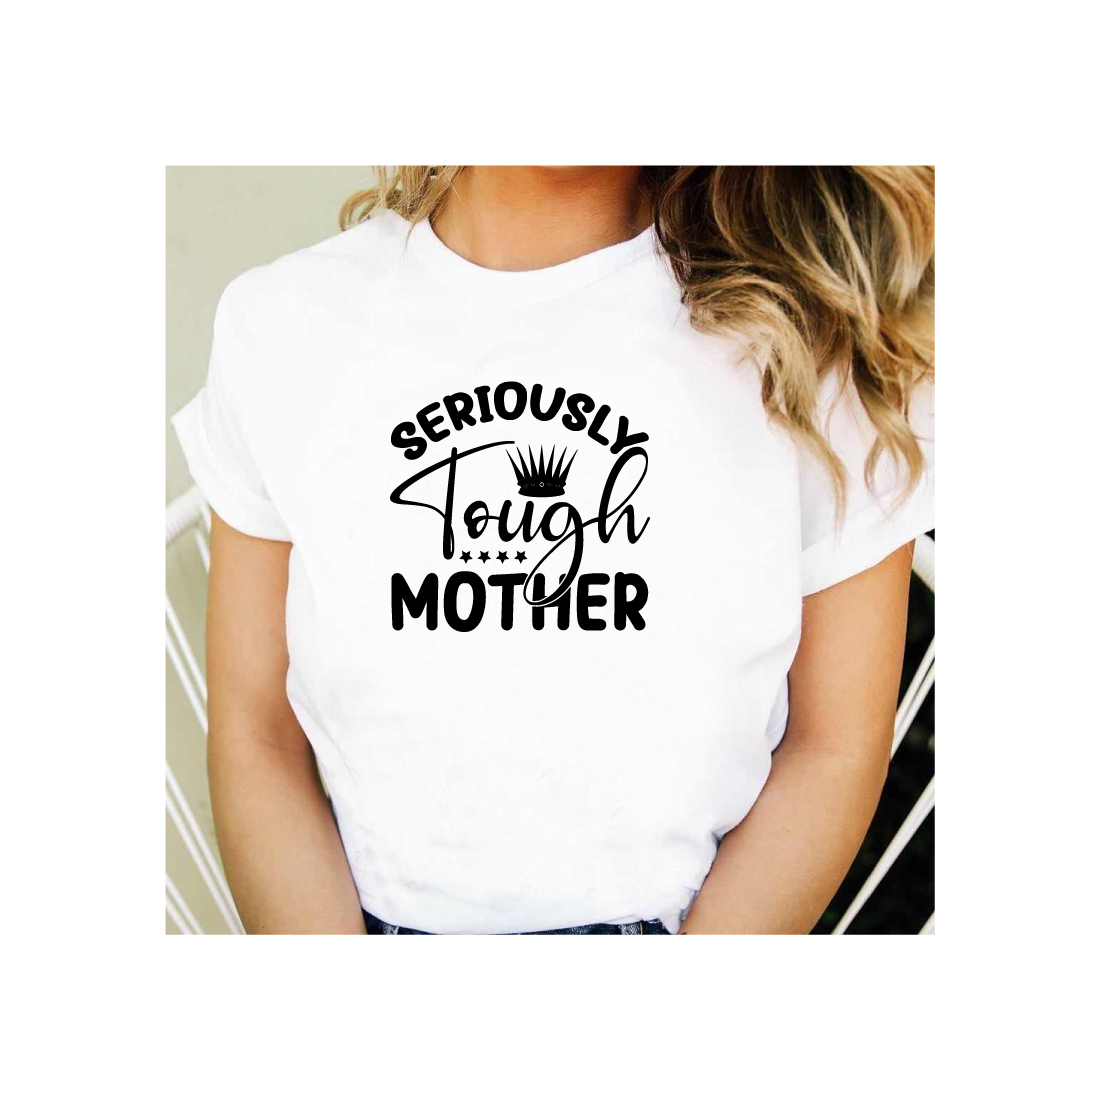 Woman wearing a t - shirt that says seriously tough mother.